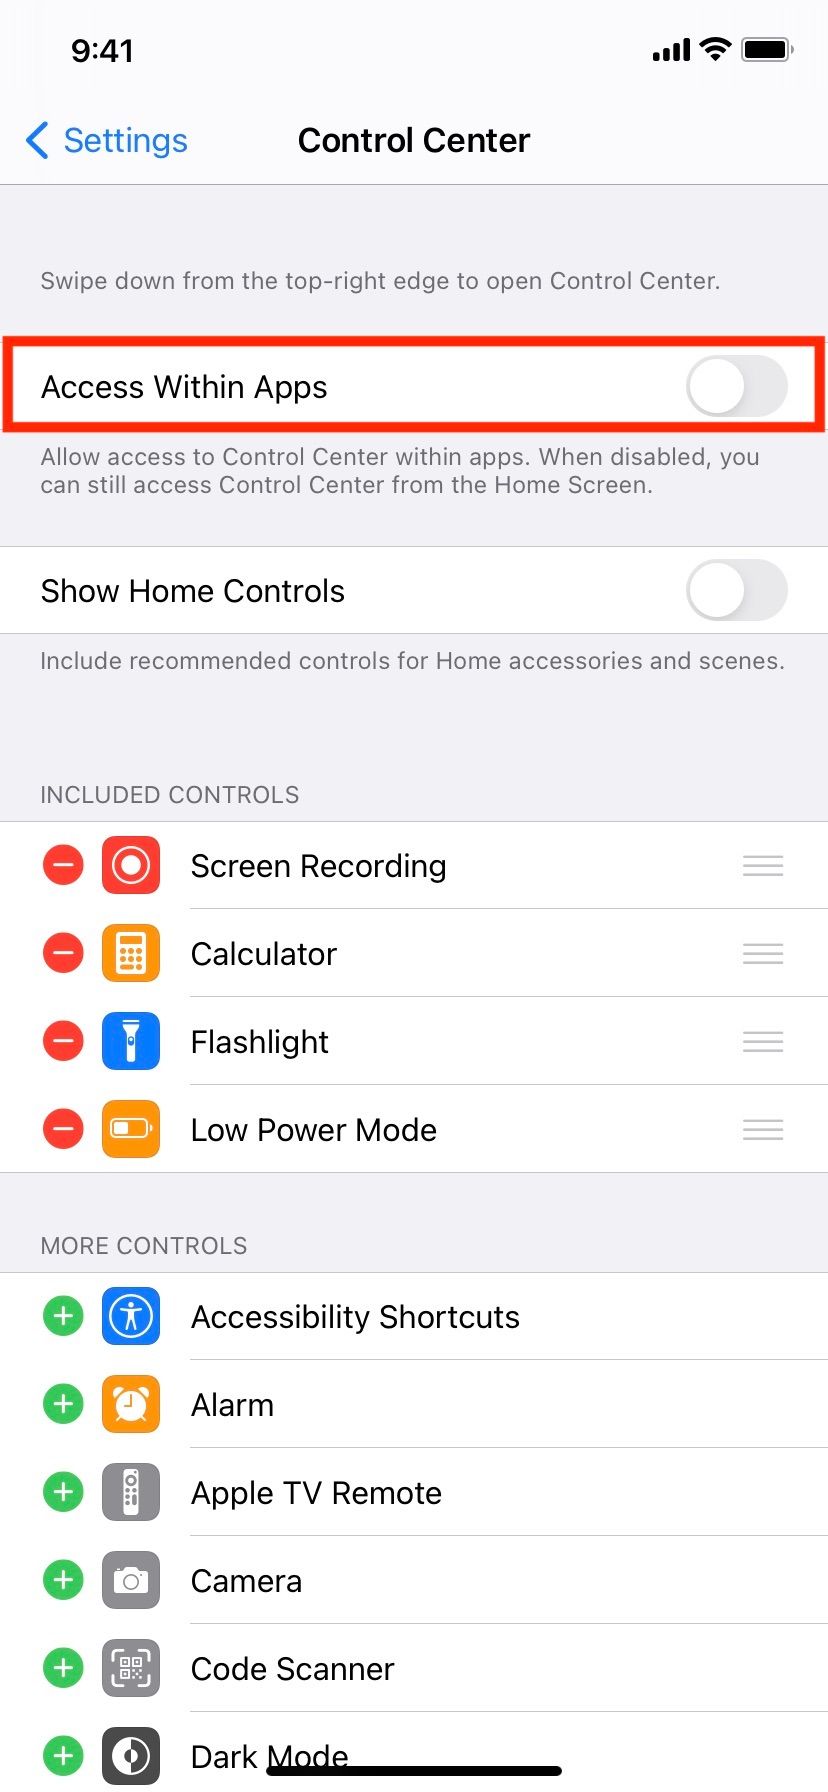 Turn off Access Within Apps in iPhone Control Center Settings